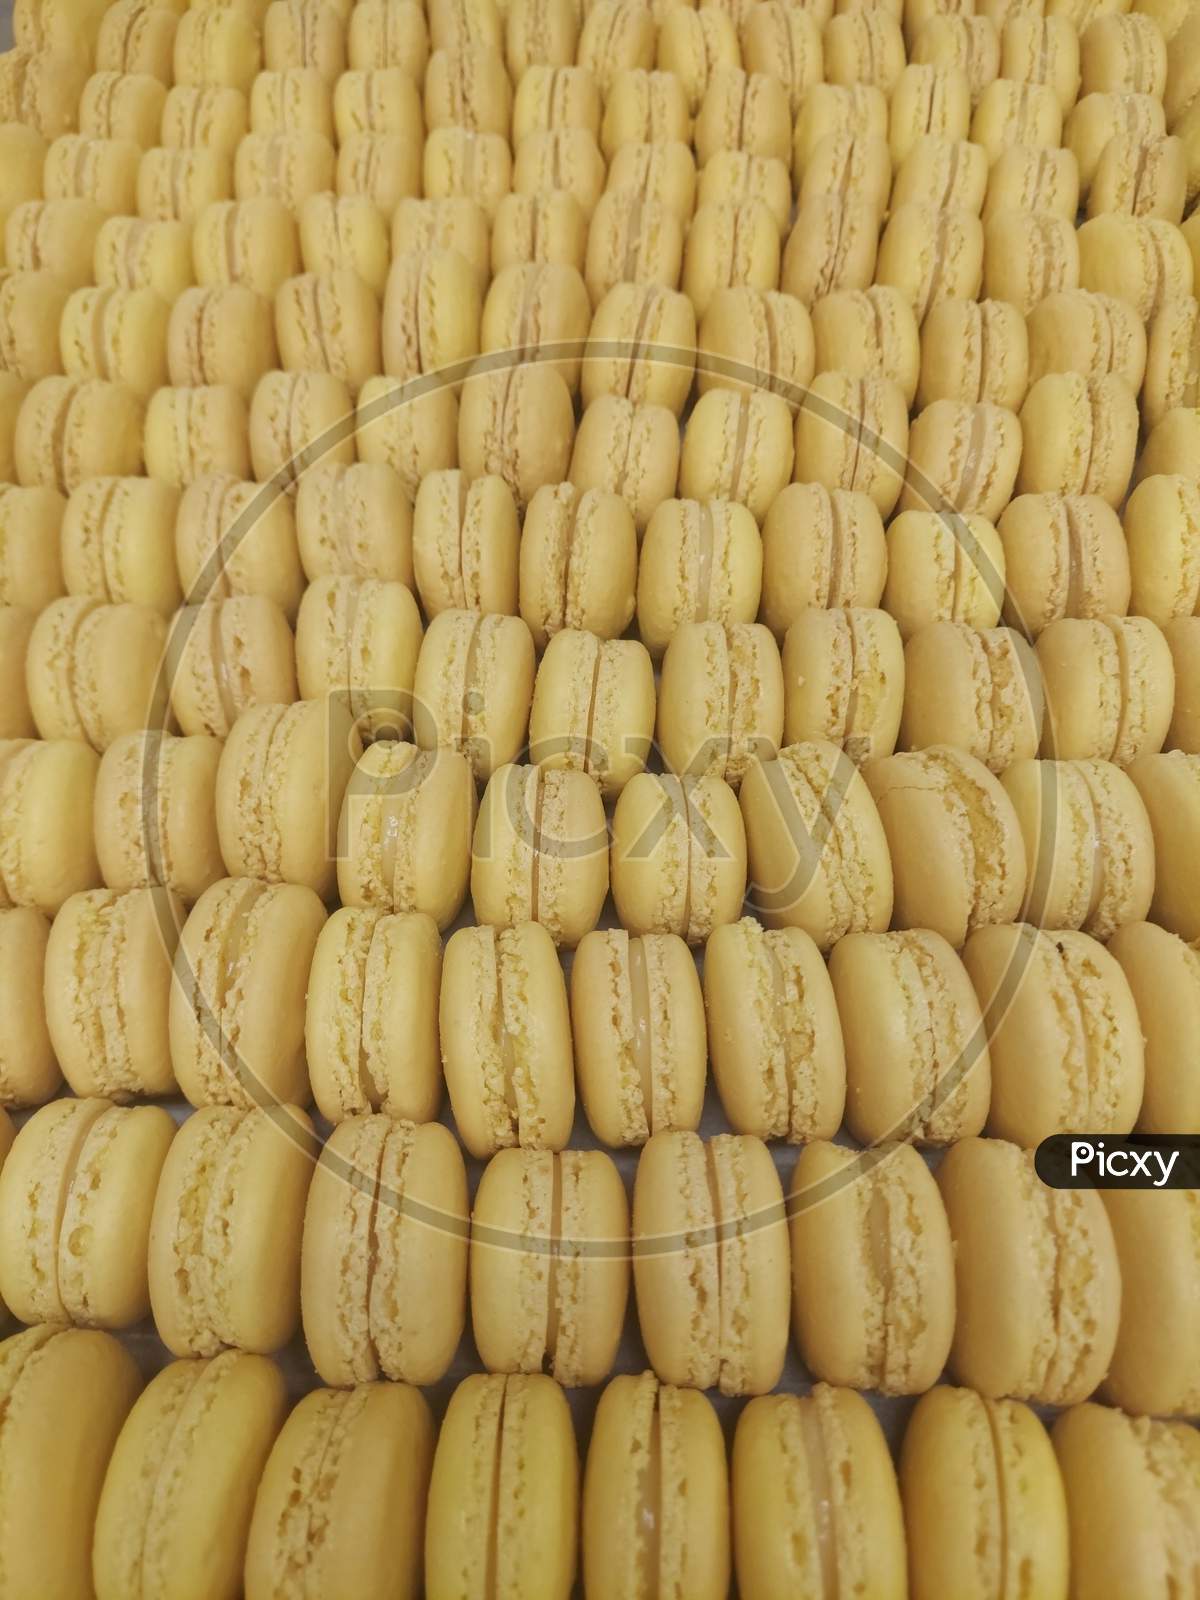 Number Of Yellow Macarons Arranged In A Tray